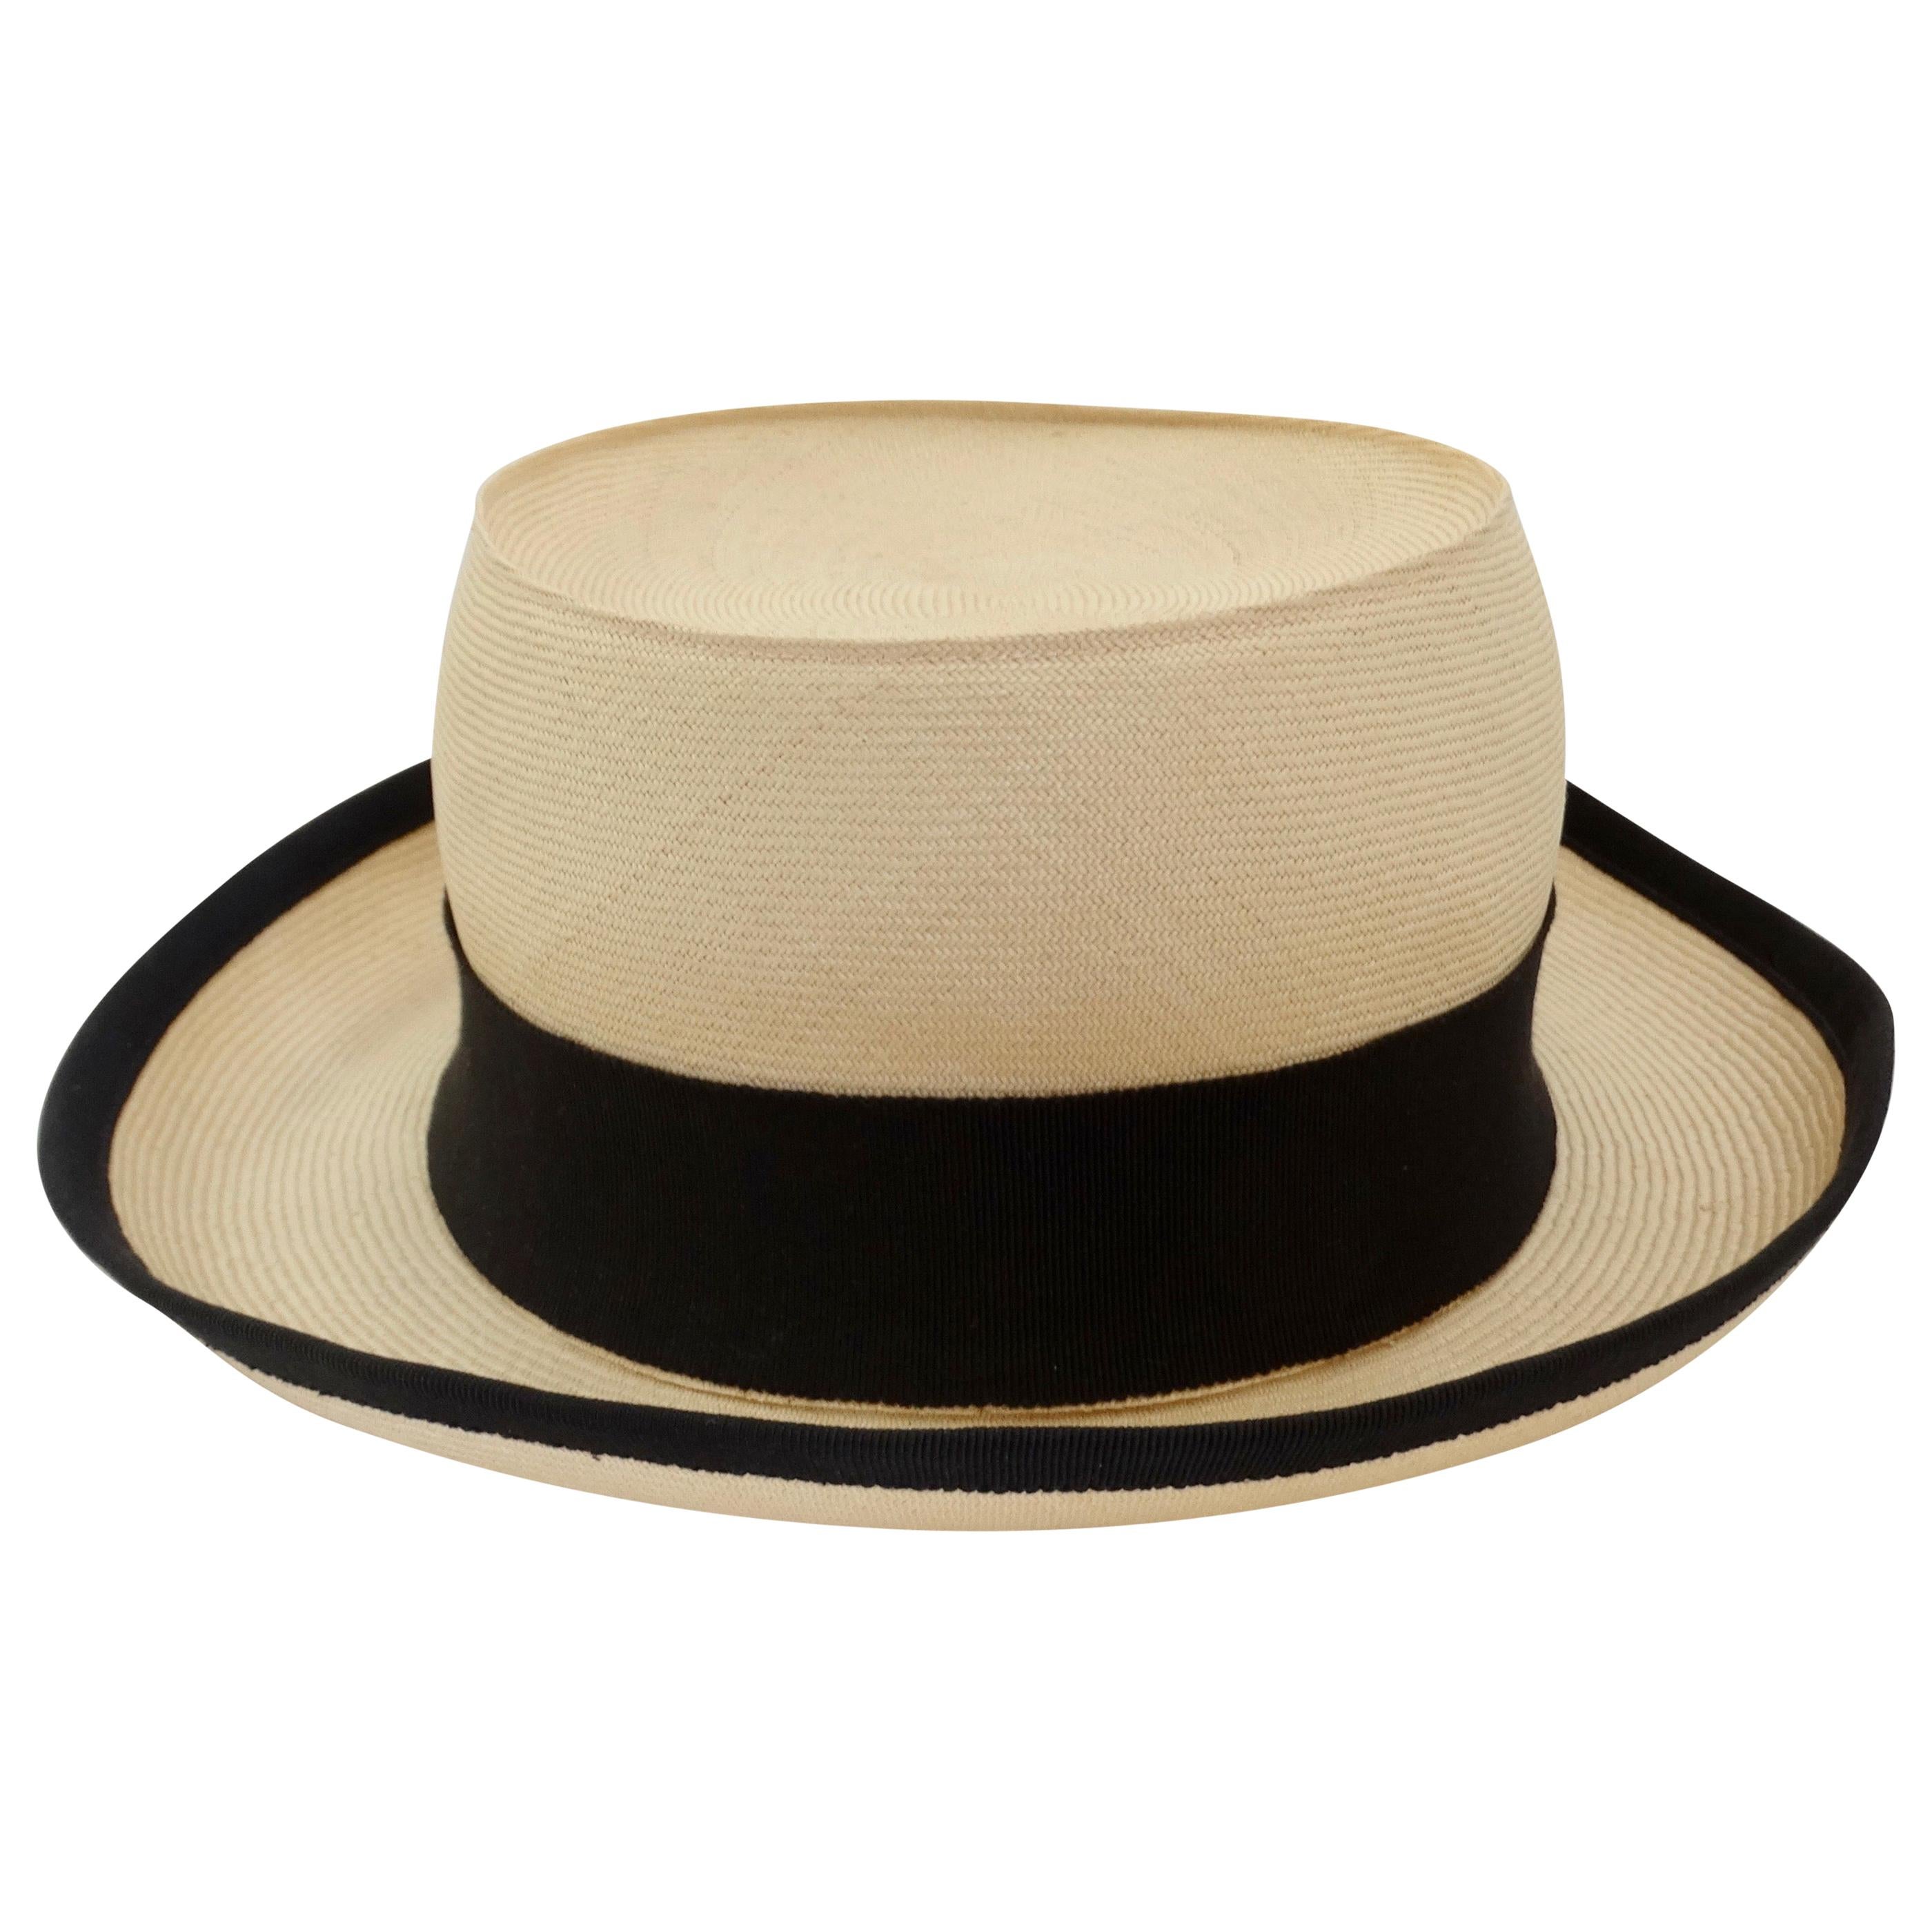 Chanel 1980s Straw Boater Hat